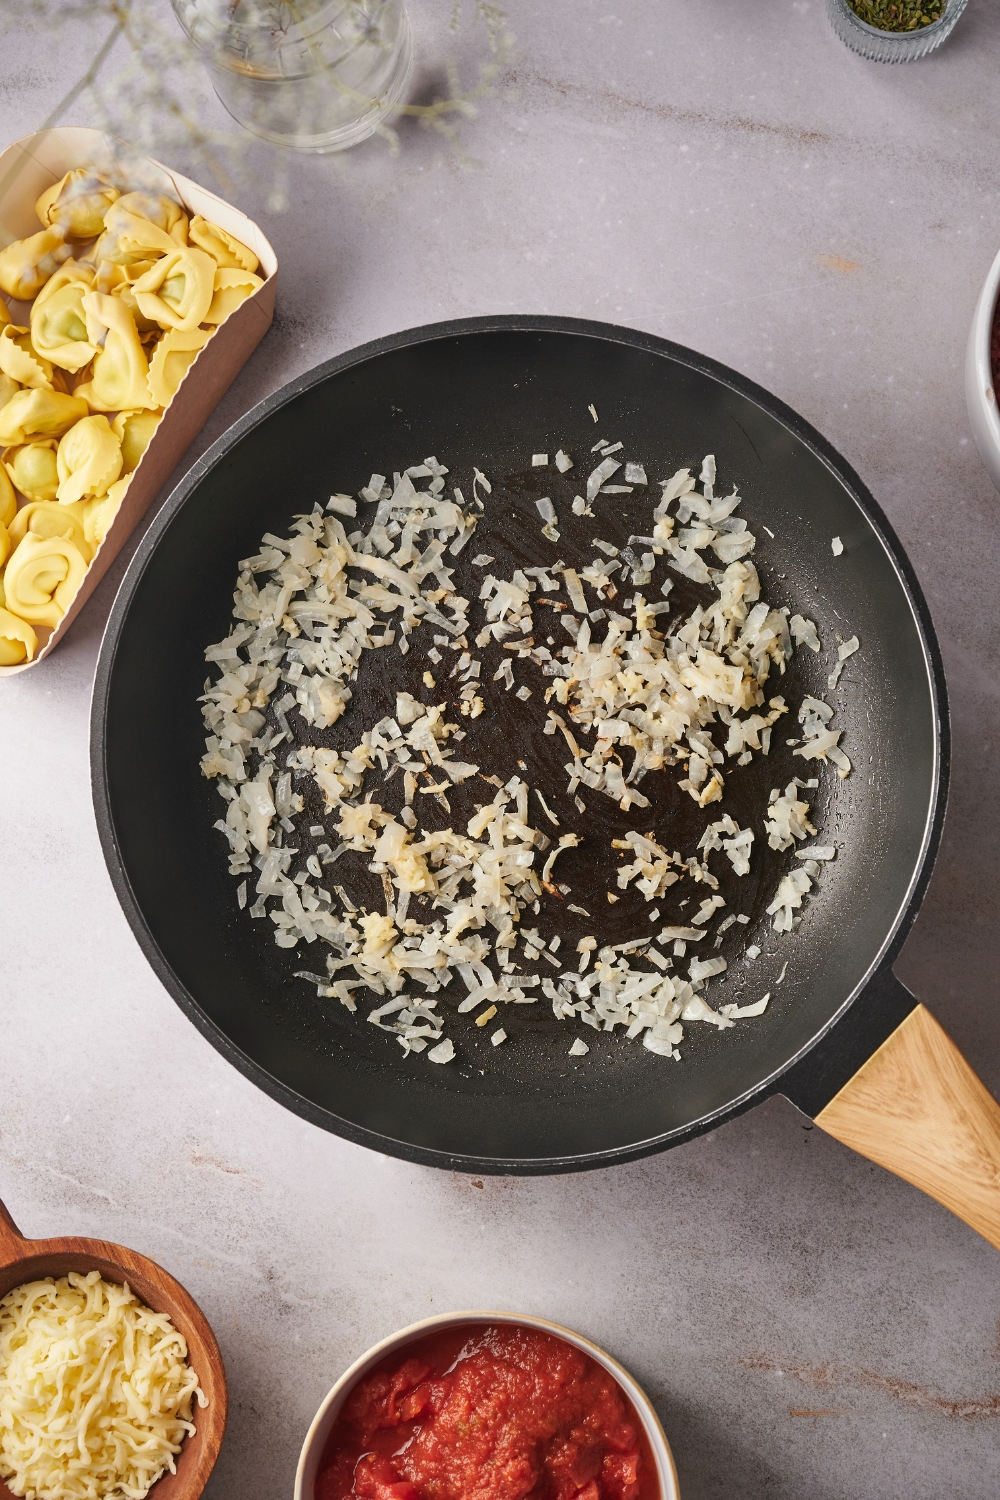 A skillet with diced onions cooking.